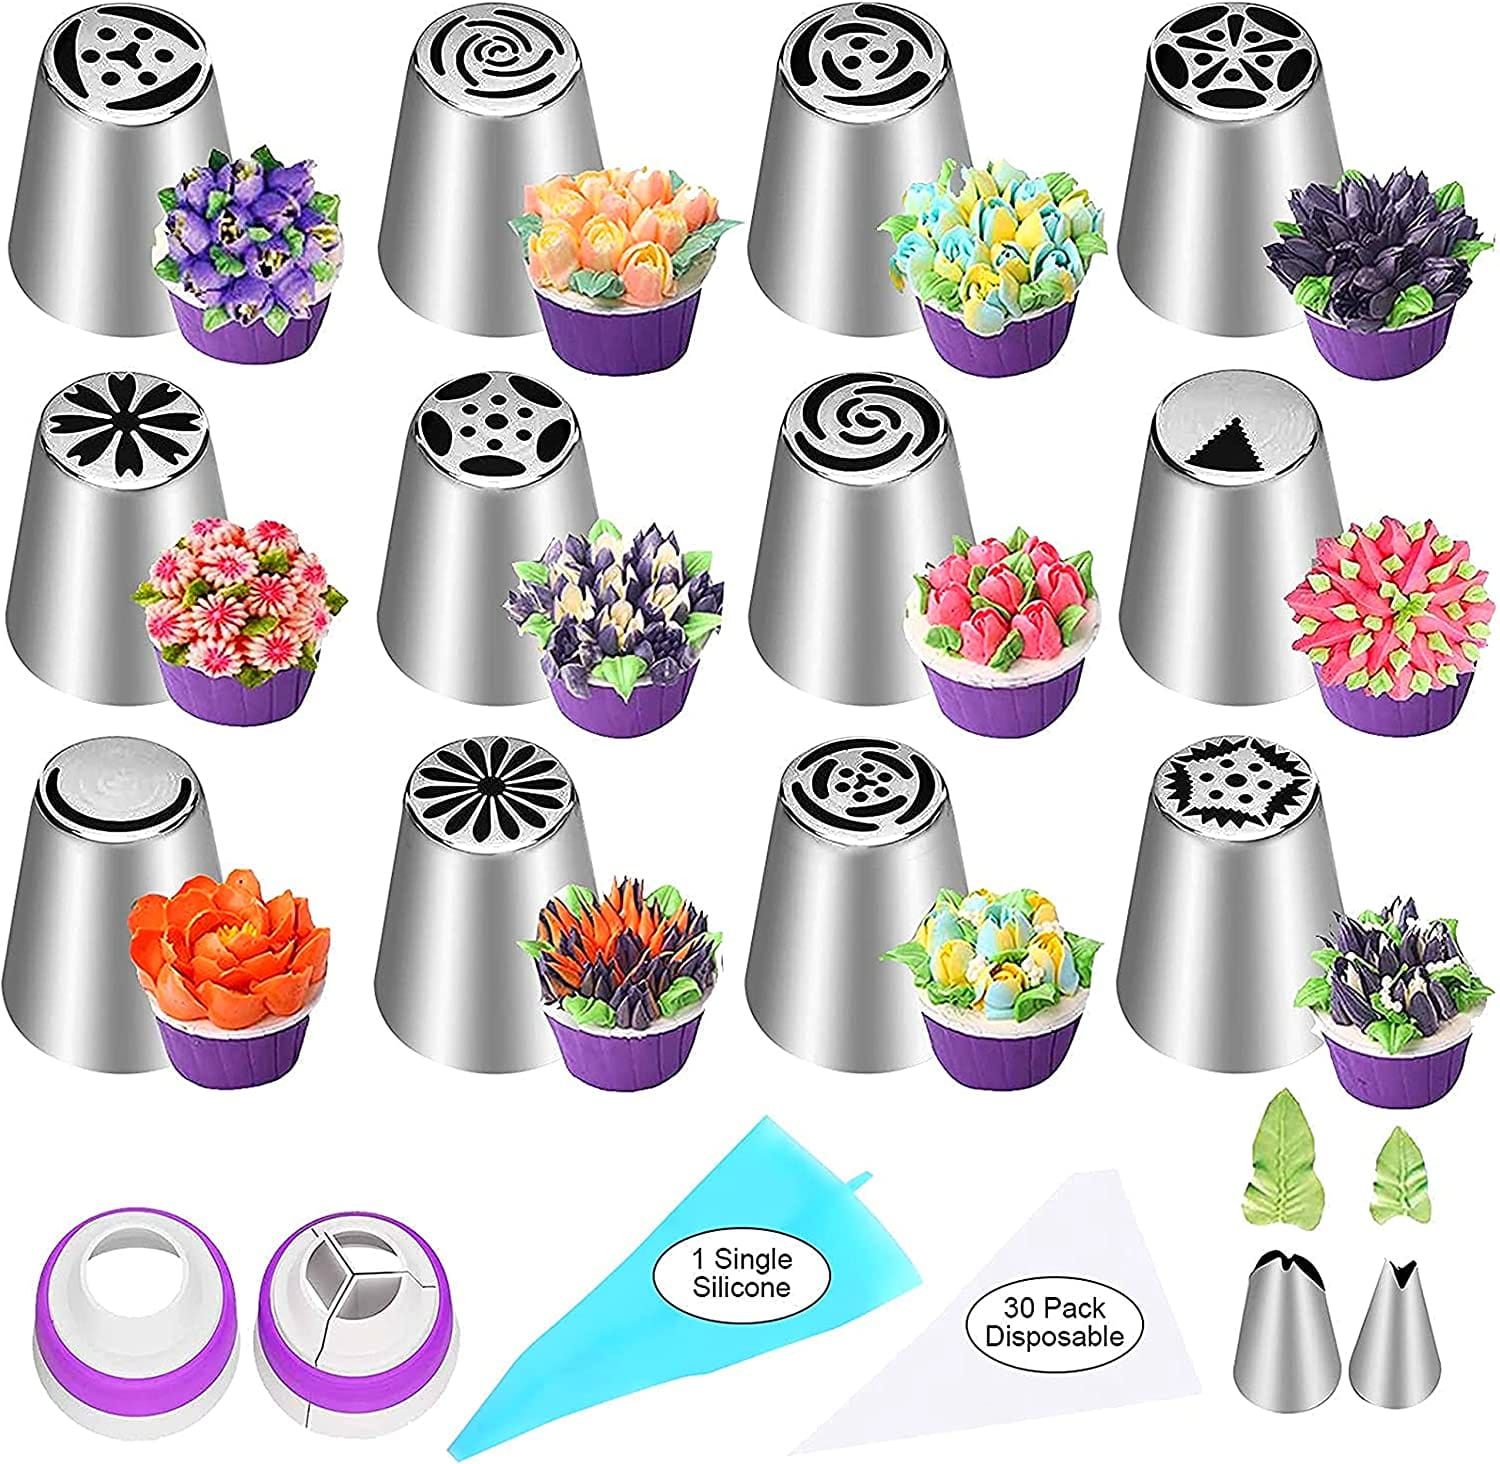 WILTON 47 Pcs Russian Piping Tips Set, 12 Flower Frosting Tips Nozzles Icing Tips for Cake Decorating Tips Kit, Baking Supplies for Cookie Cupcake, 2 Leaf Piping Tips 2 Couplers 30 Pastry Baking Bags - WIL-103-X002PV